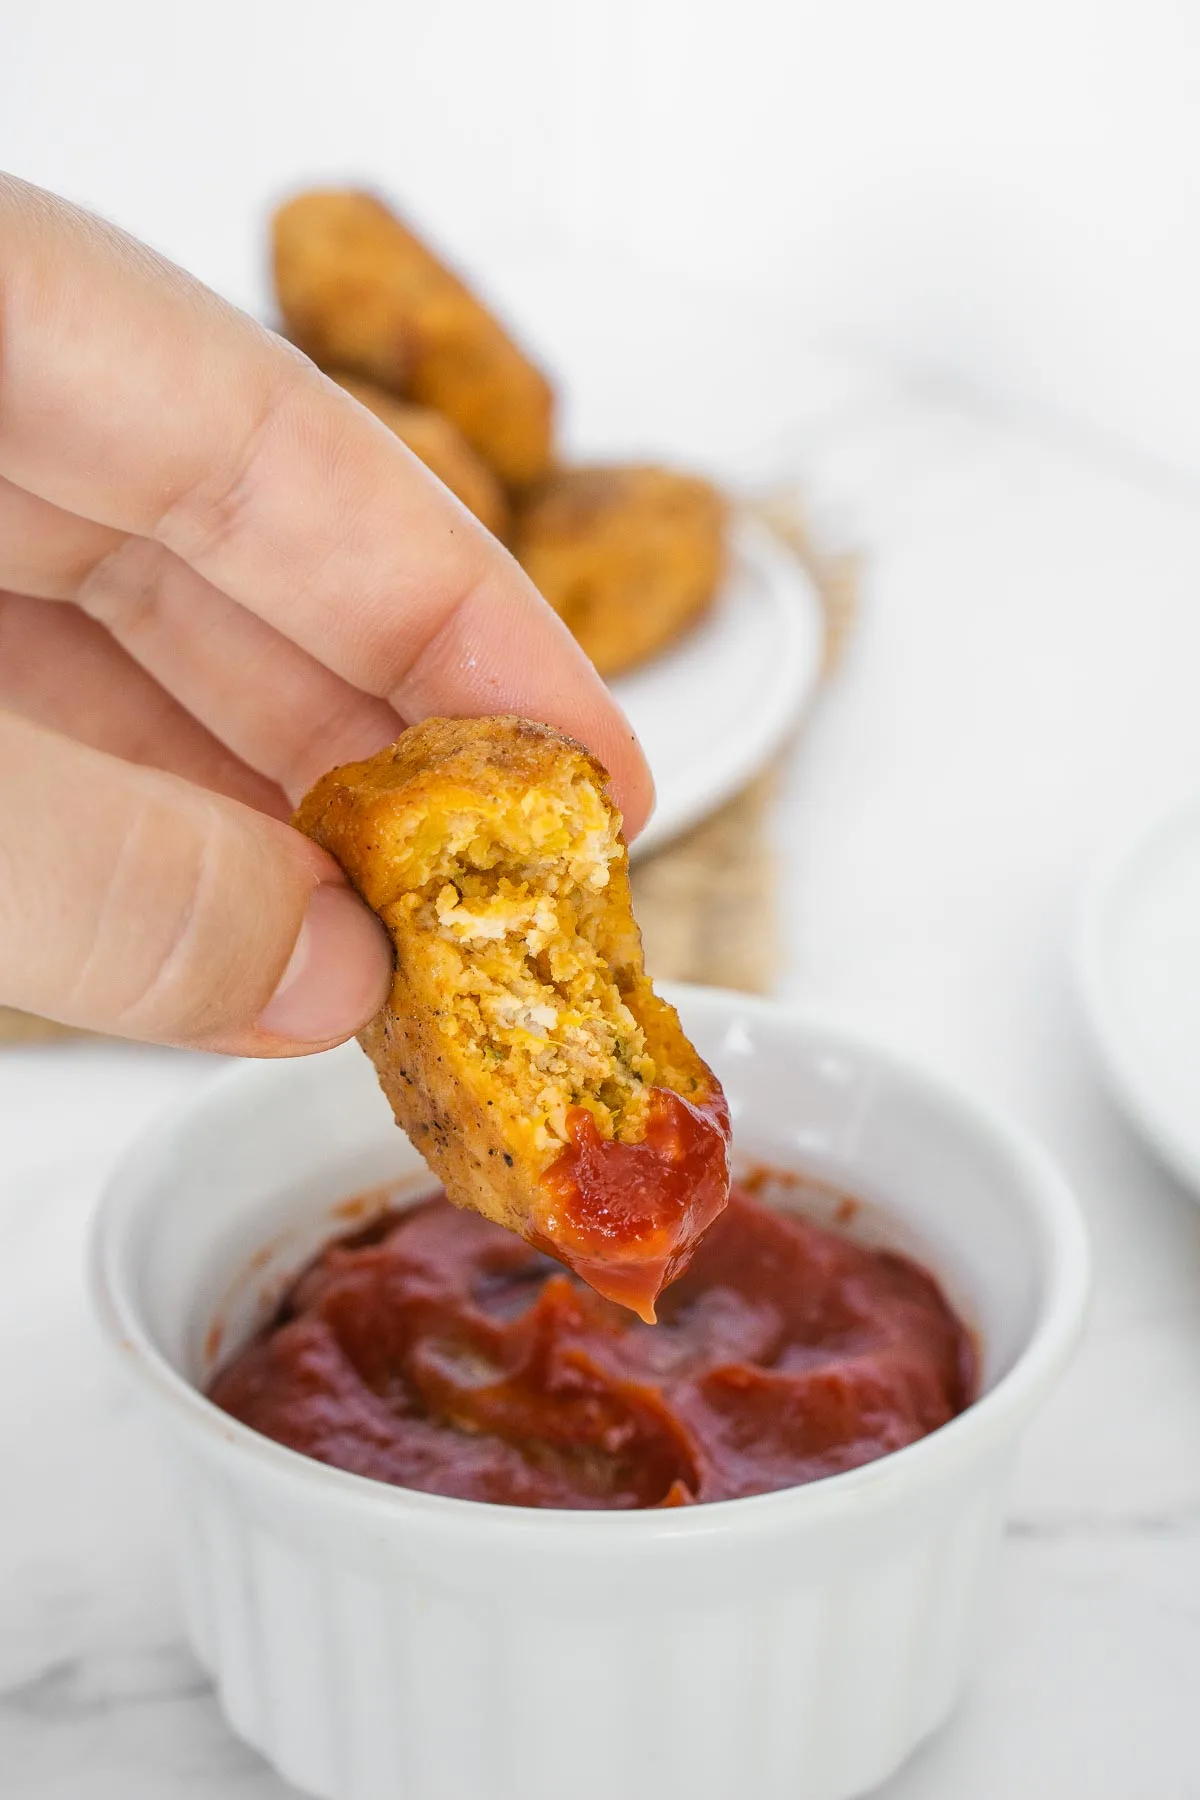 Showing the inside of a sweet potato chicken nugget that's dipped in ketchup.